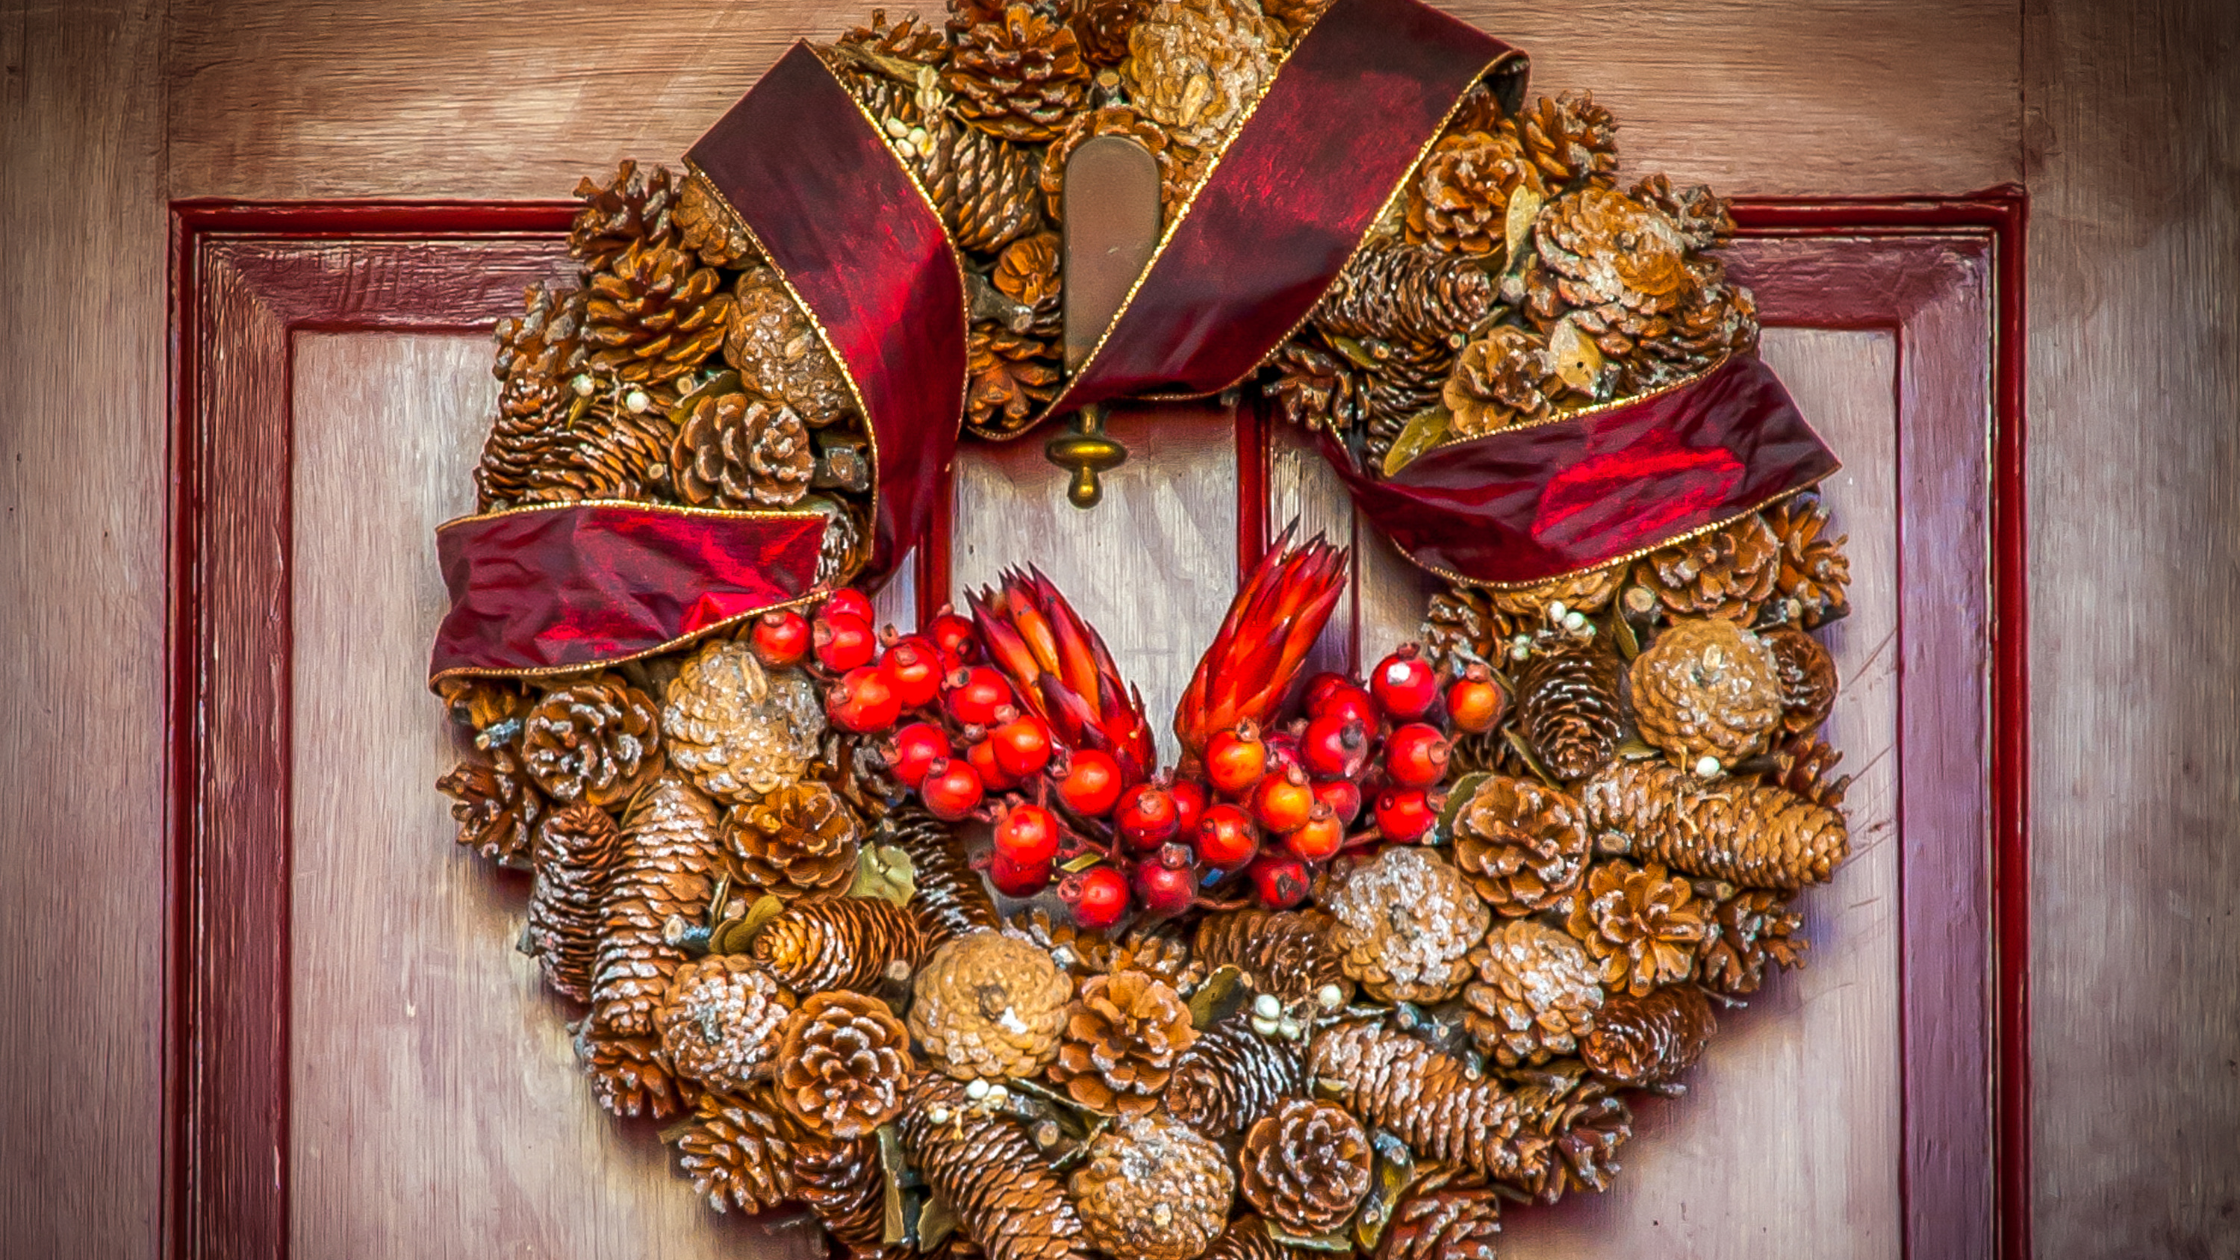 4 Stunning Wreath Ideas to Make a Statement to Your Front Door